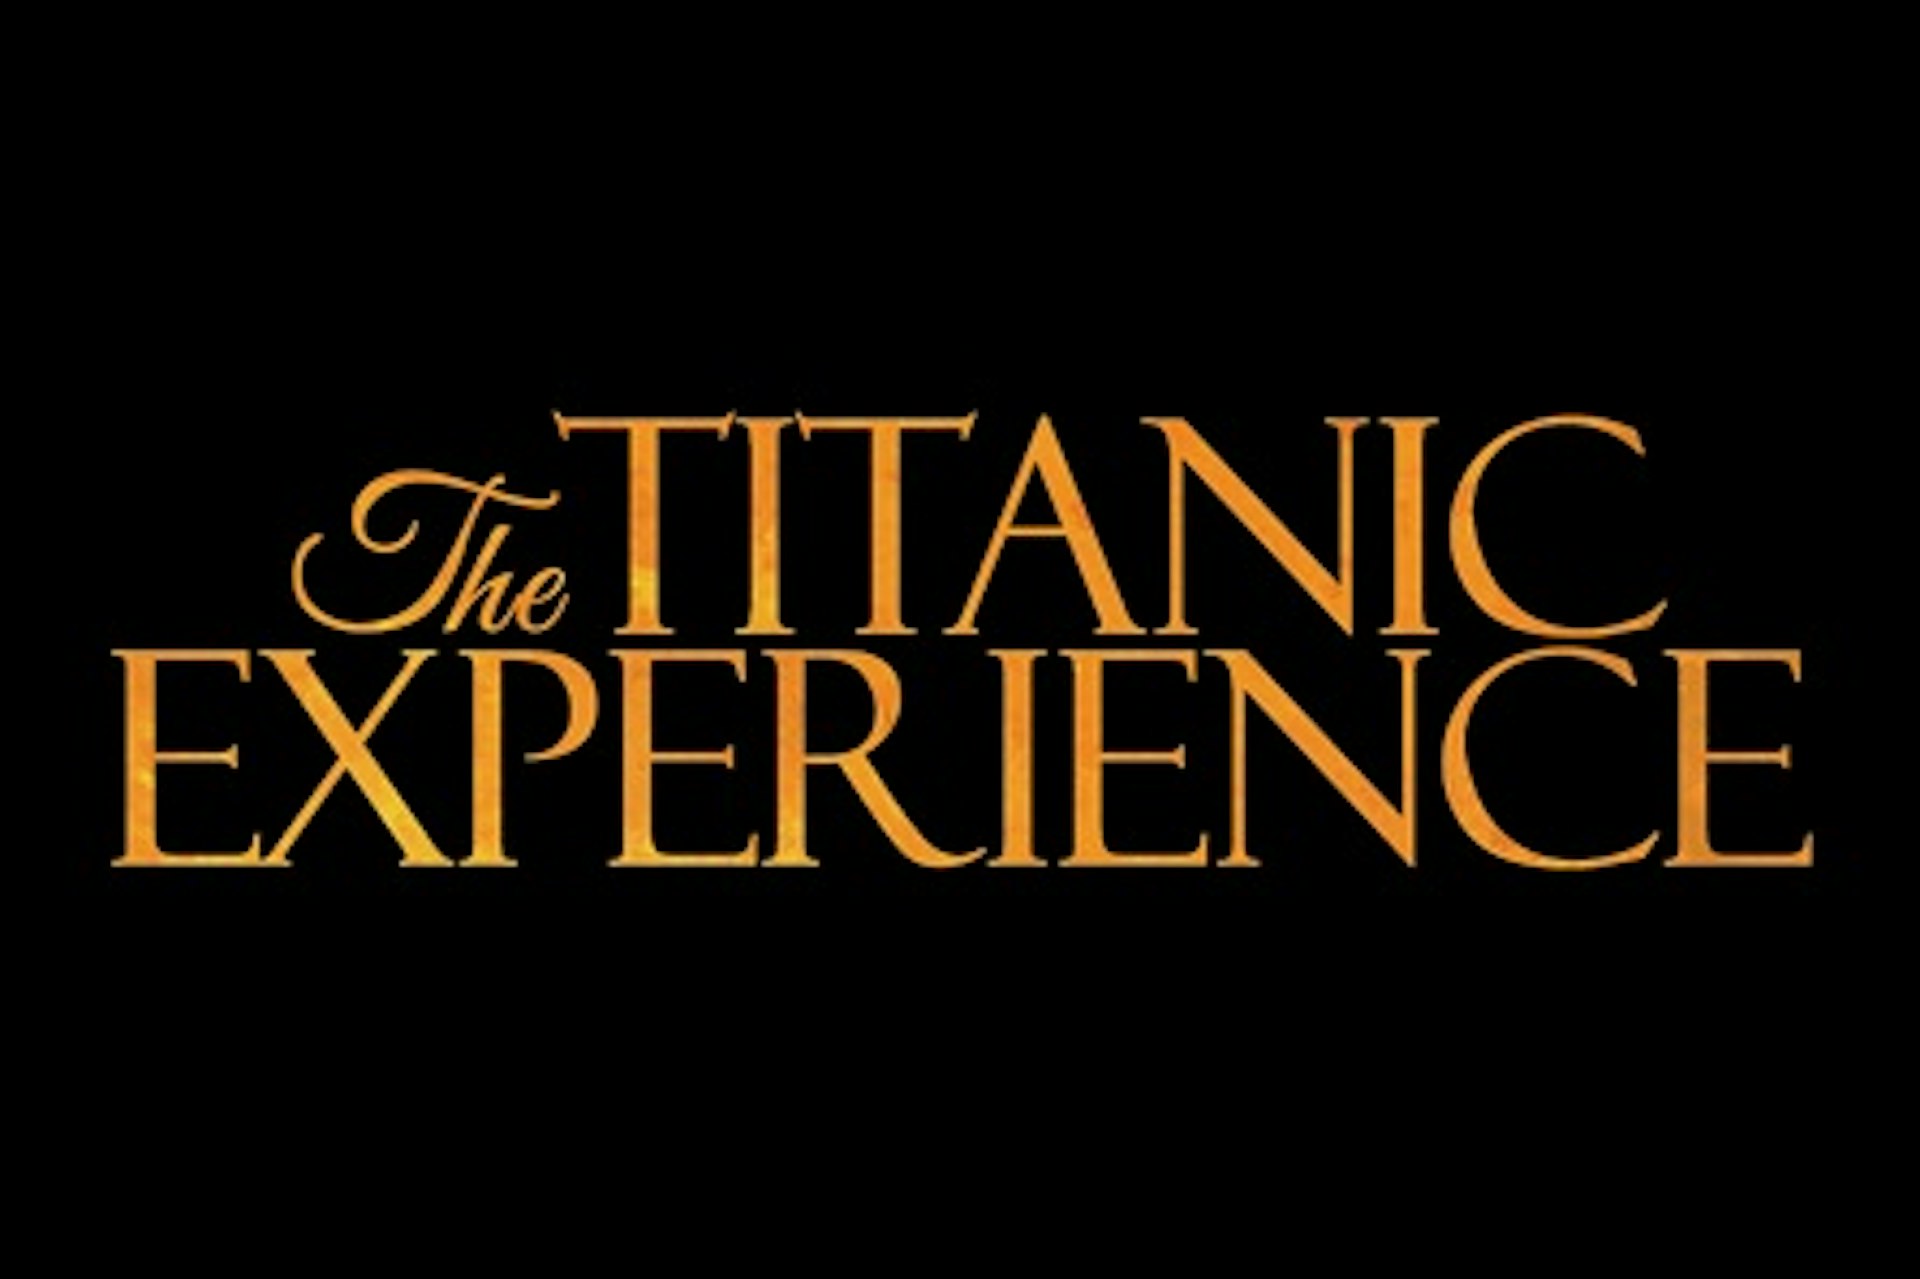 The Queen of the Ocean Immersive Titanic Dining Experience at The Savoy Hotel, London